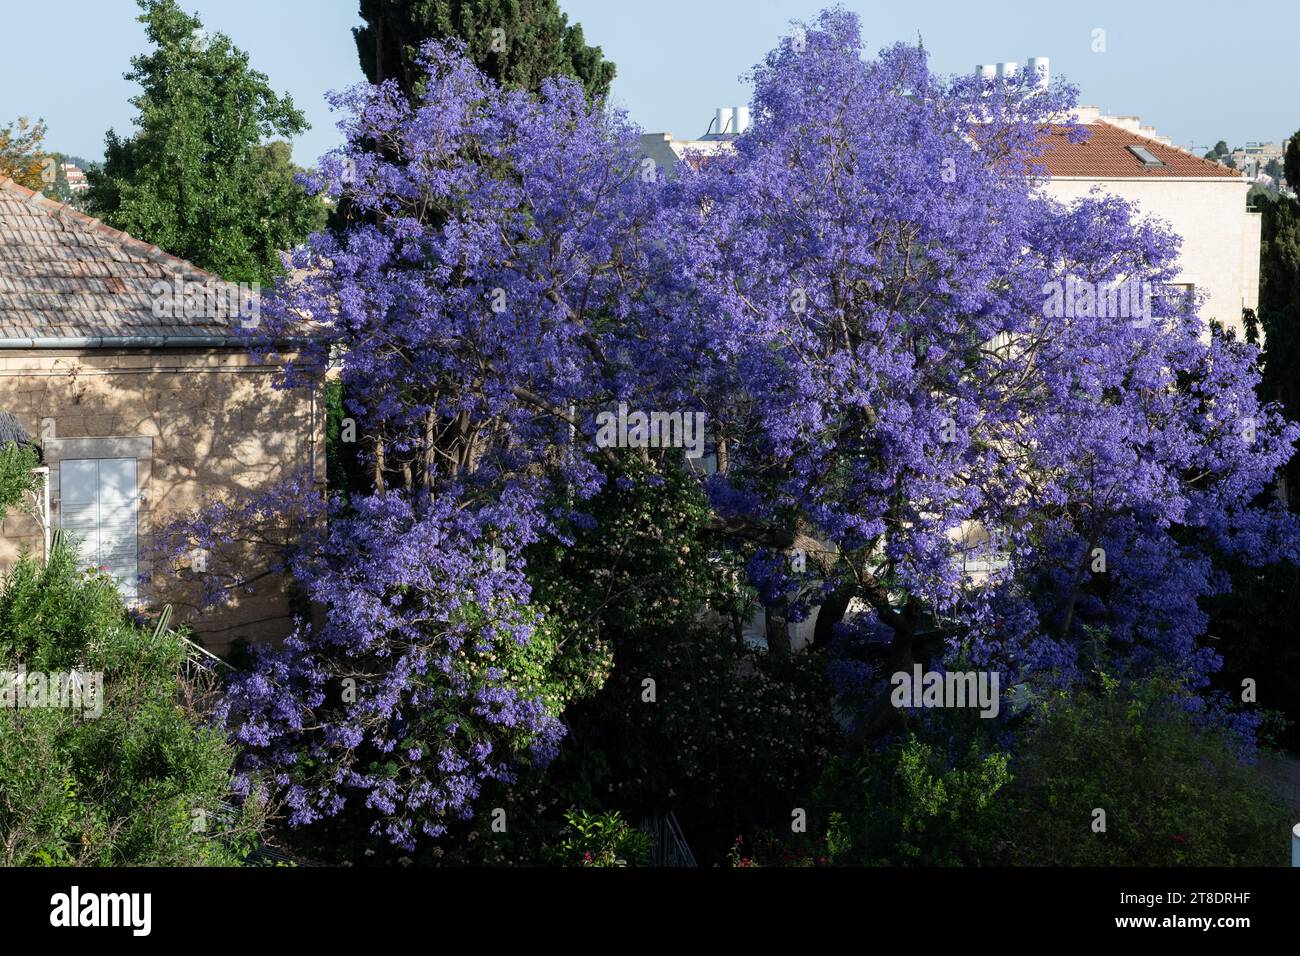 A large, mature jacaranda tree at the height of its spring flowering shows off a healthy crown of violet blossoms. Stock Photo